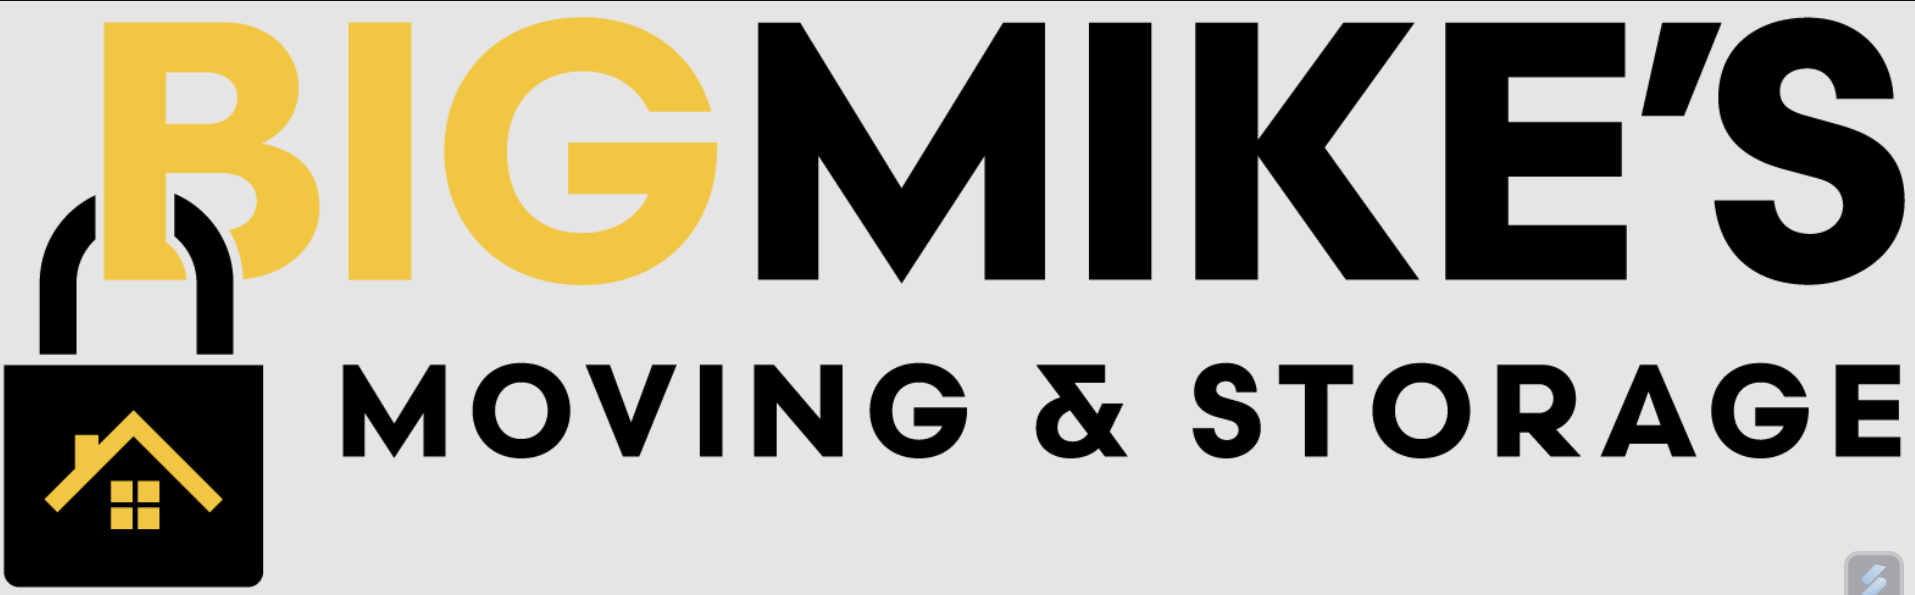 Big Mike's Moving & Delivery company logo